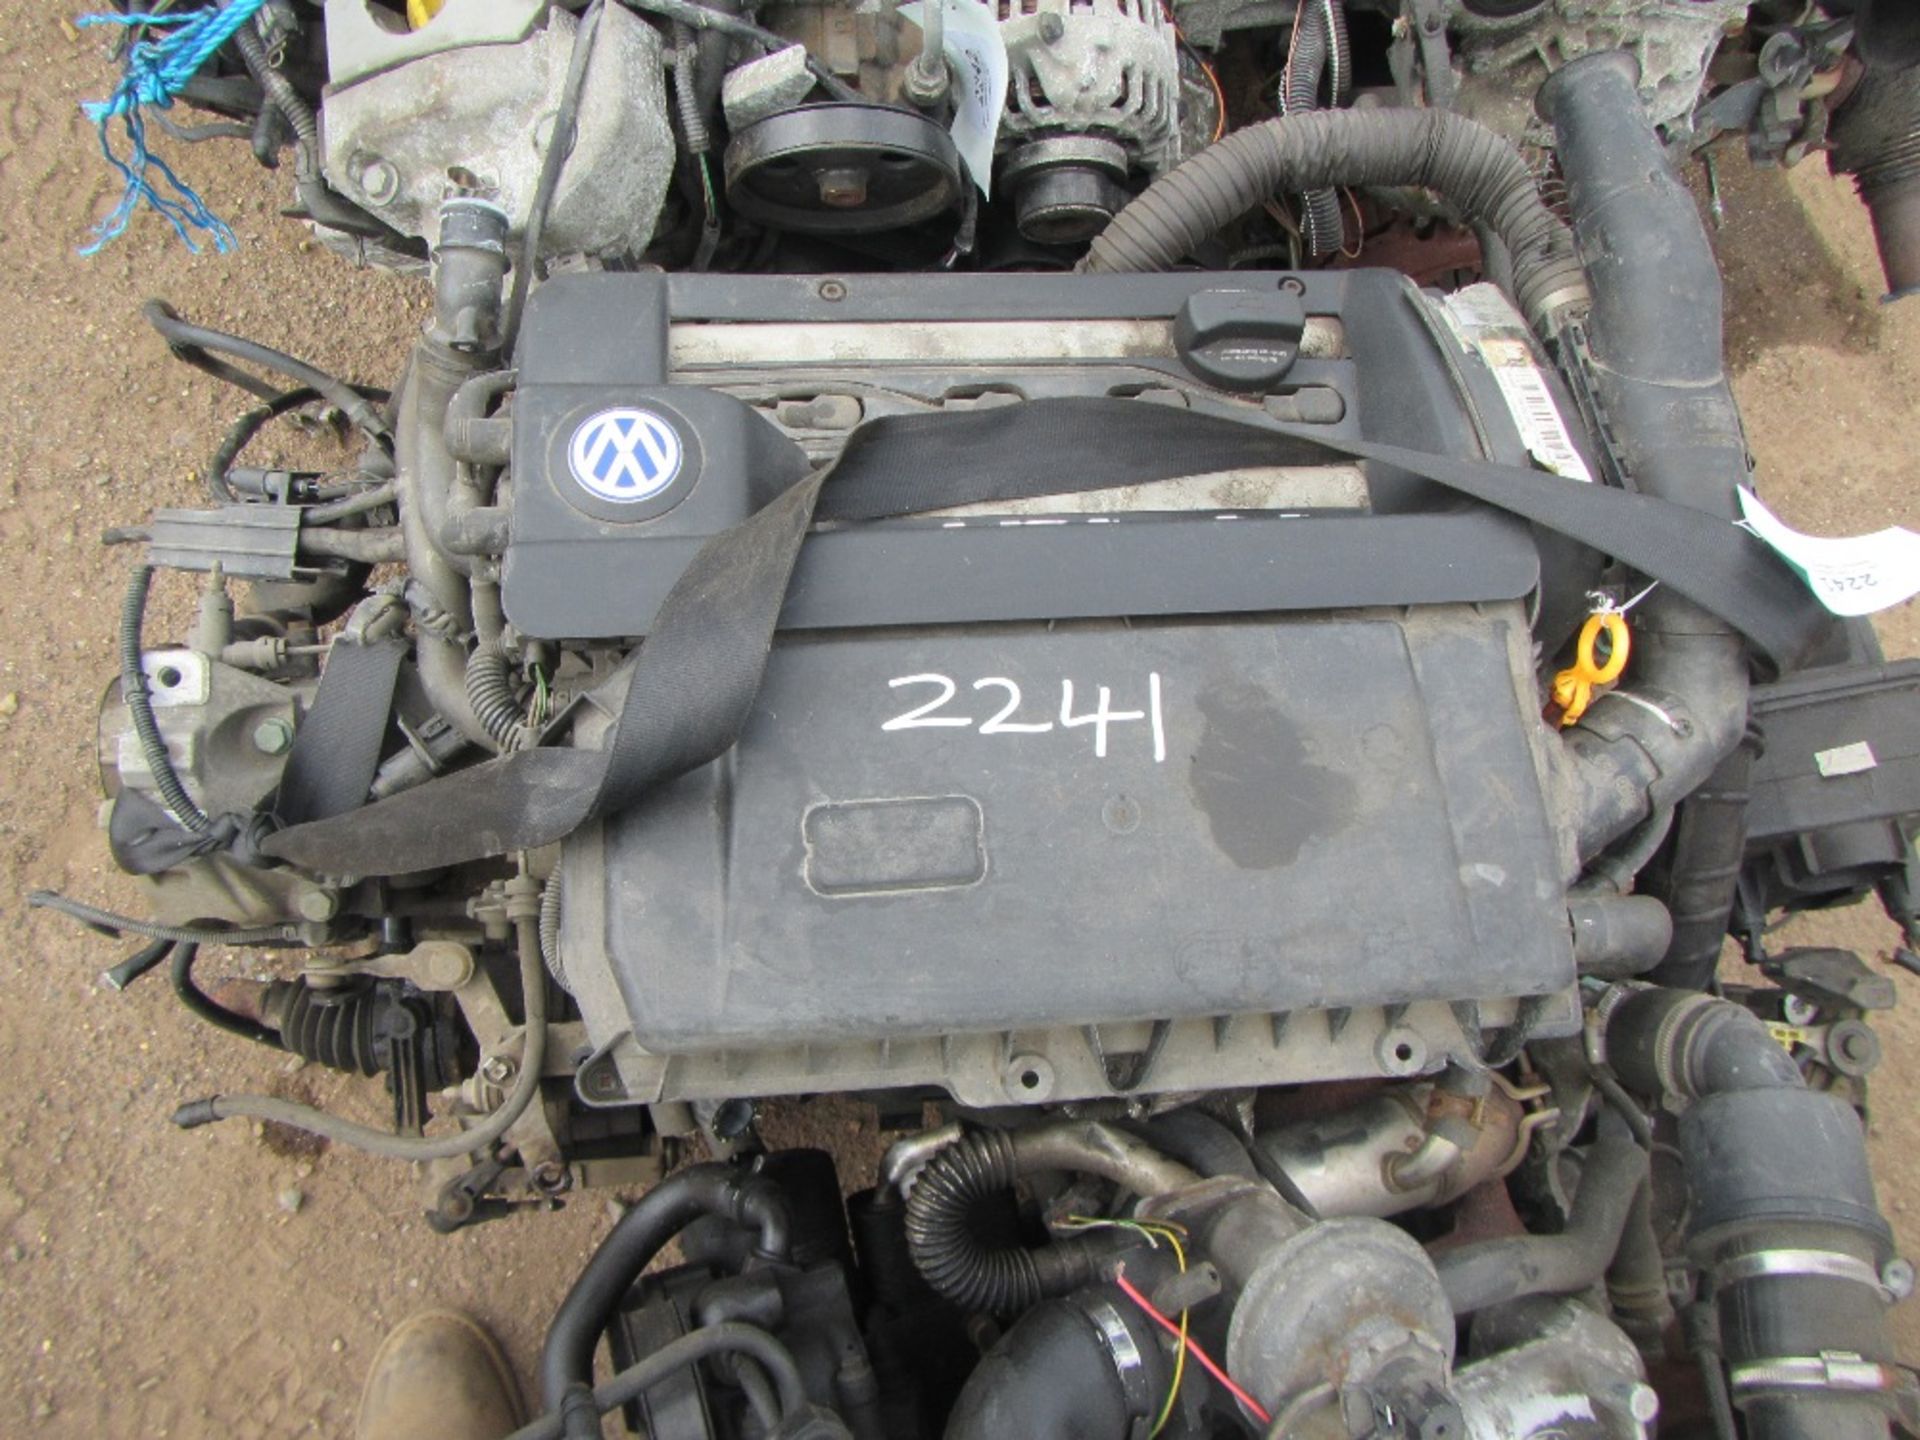 VW 1.4 16v Engine & Gearbox Complete